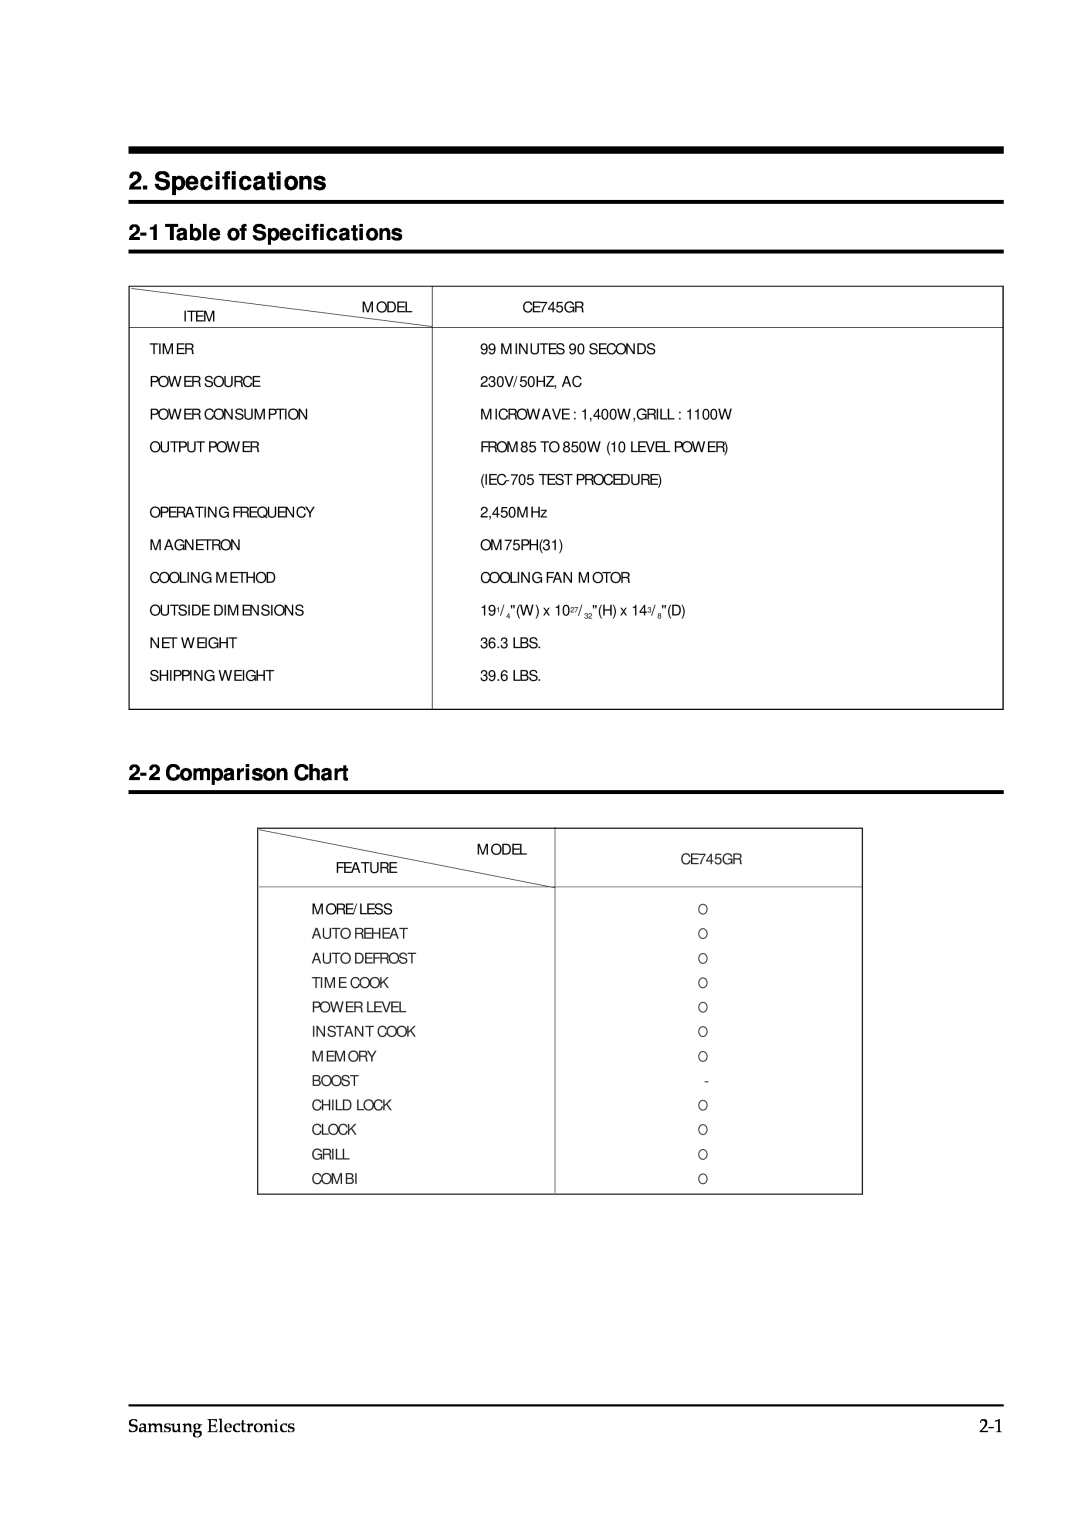 Samsung CE745GR service manual Table of Specifications, Comparison Chart 